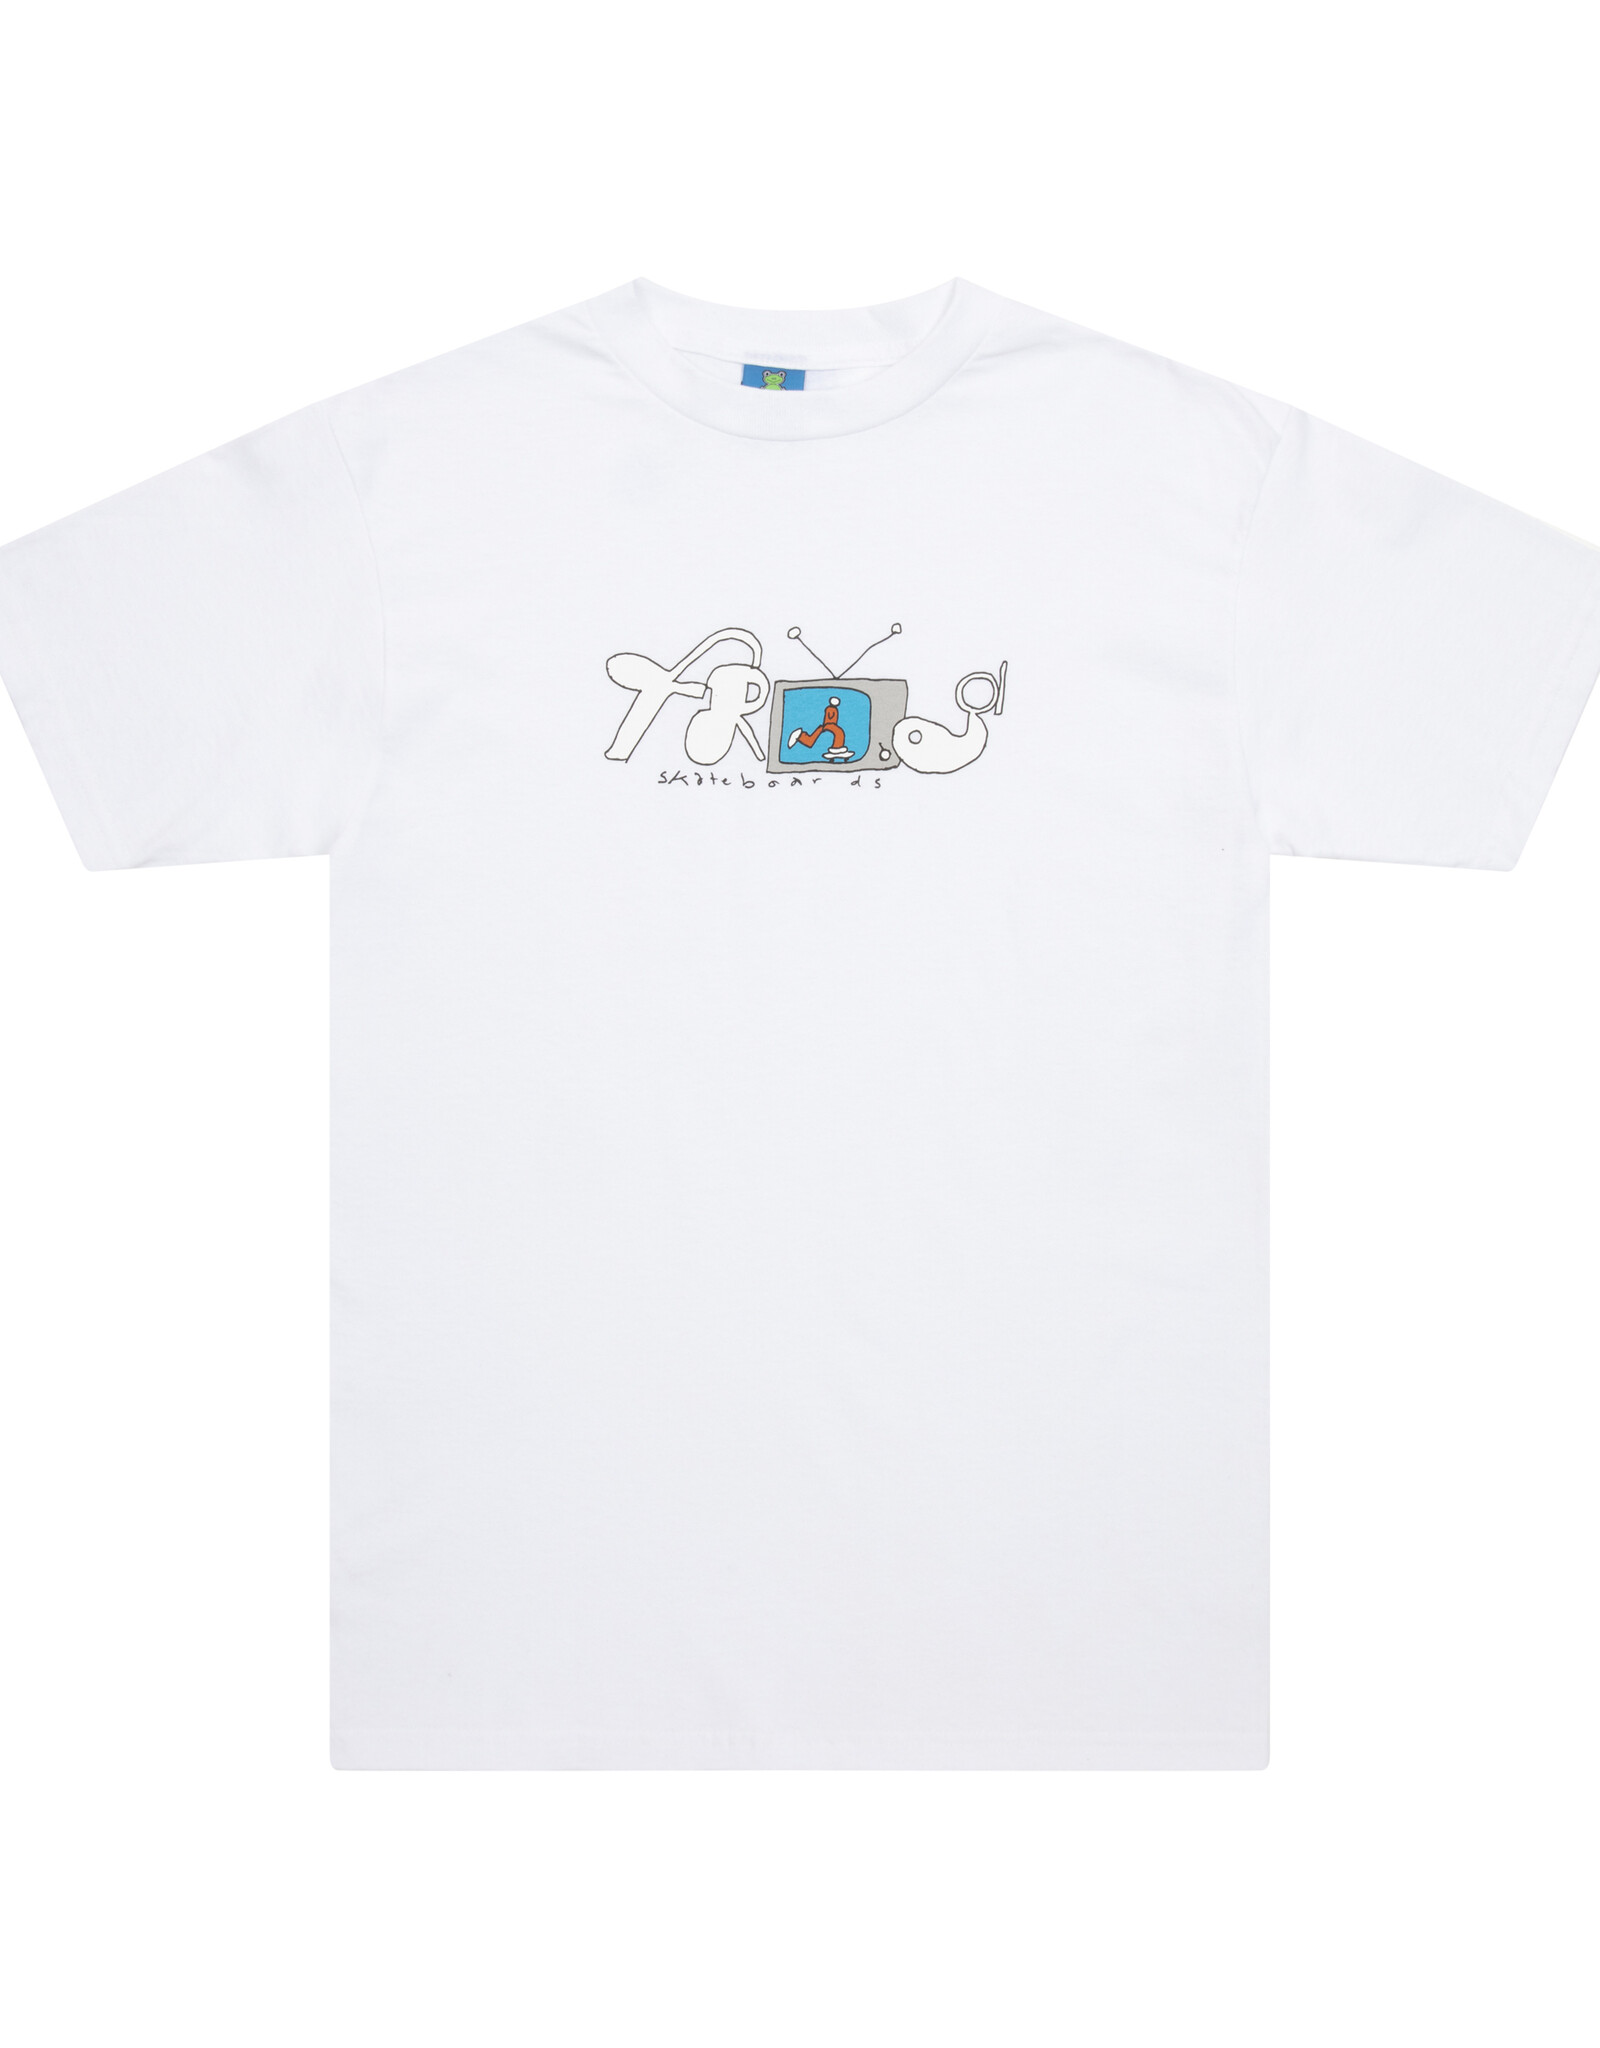 FROG FROG TELEVISION TEE - WHITE